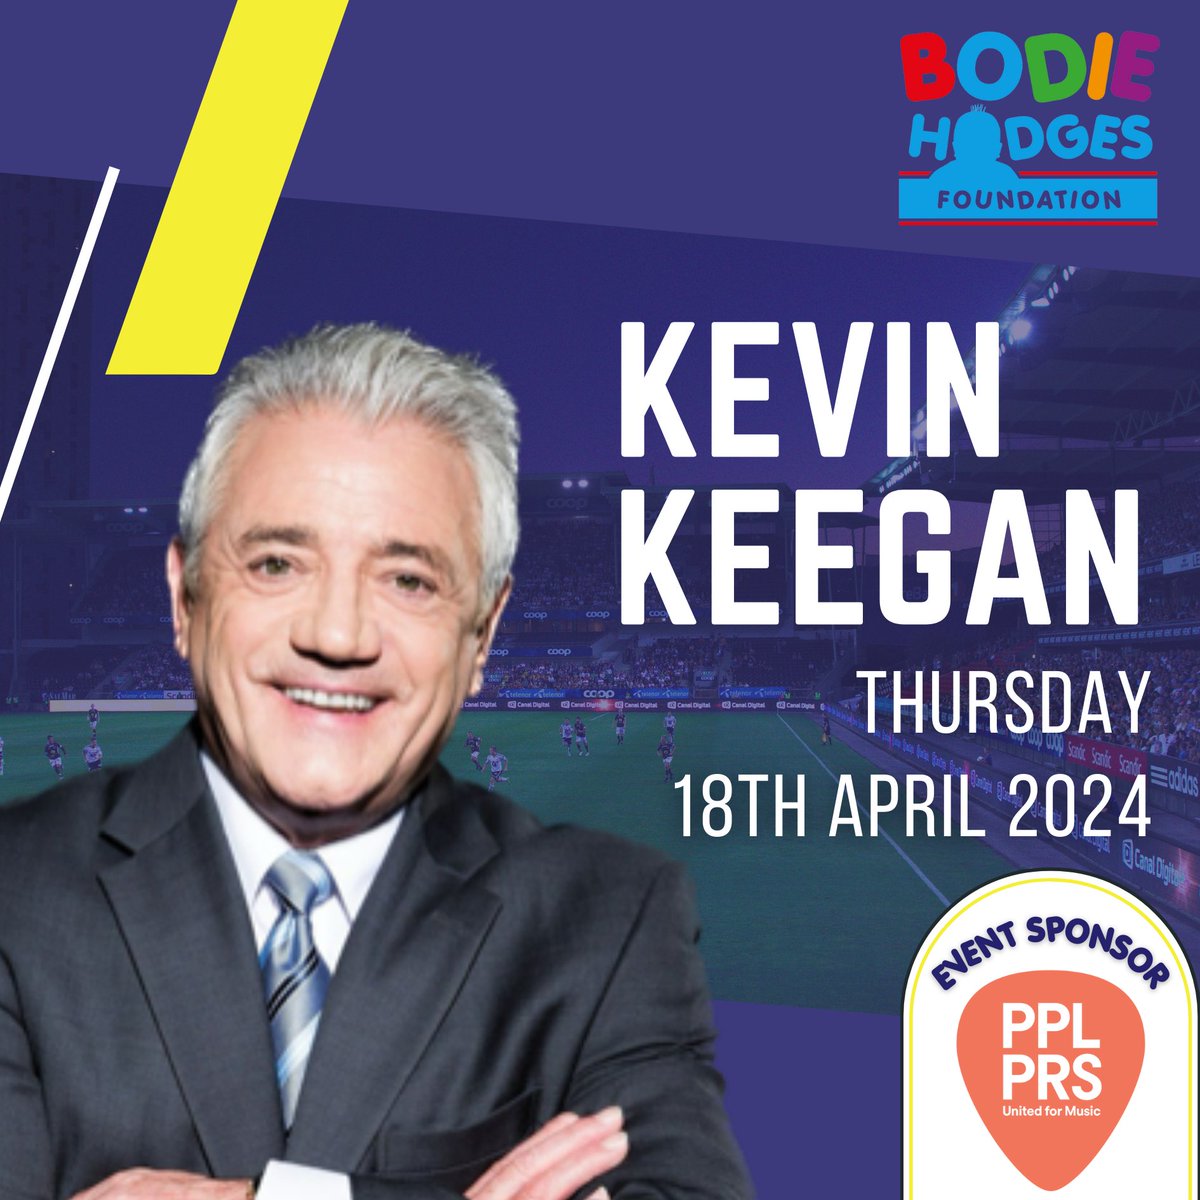 We’d like to give🌟@pplprs🌟a huge shout out for being one of our Event Sponsors for our 2024 Annual Sports Dinner⚽with #KevinKeegan at @WinstanleyHouse next month! Thank you to PPL PRS for your incredible support!🎵 JOIN US! Limited tickets ⬇️ bodiehodgesfoundation.co.uk/sports-dinner2…